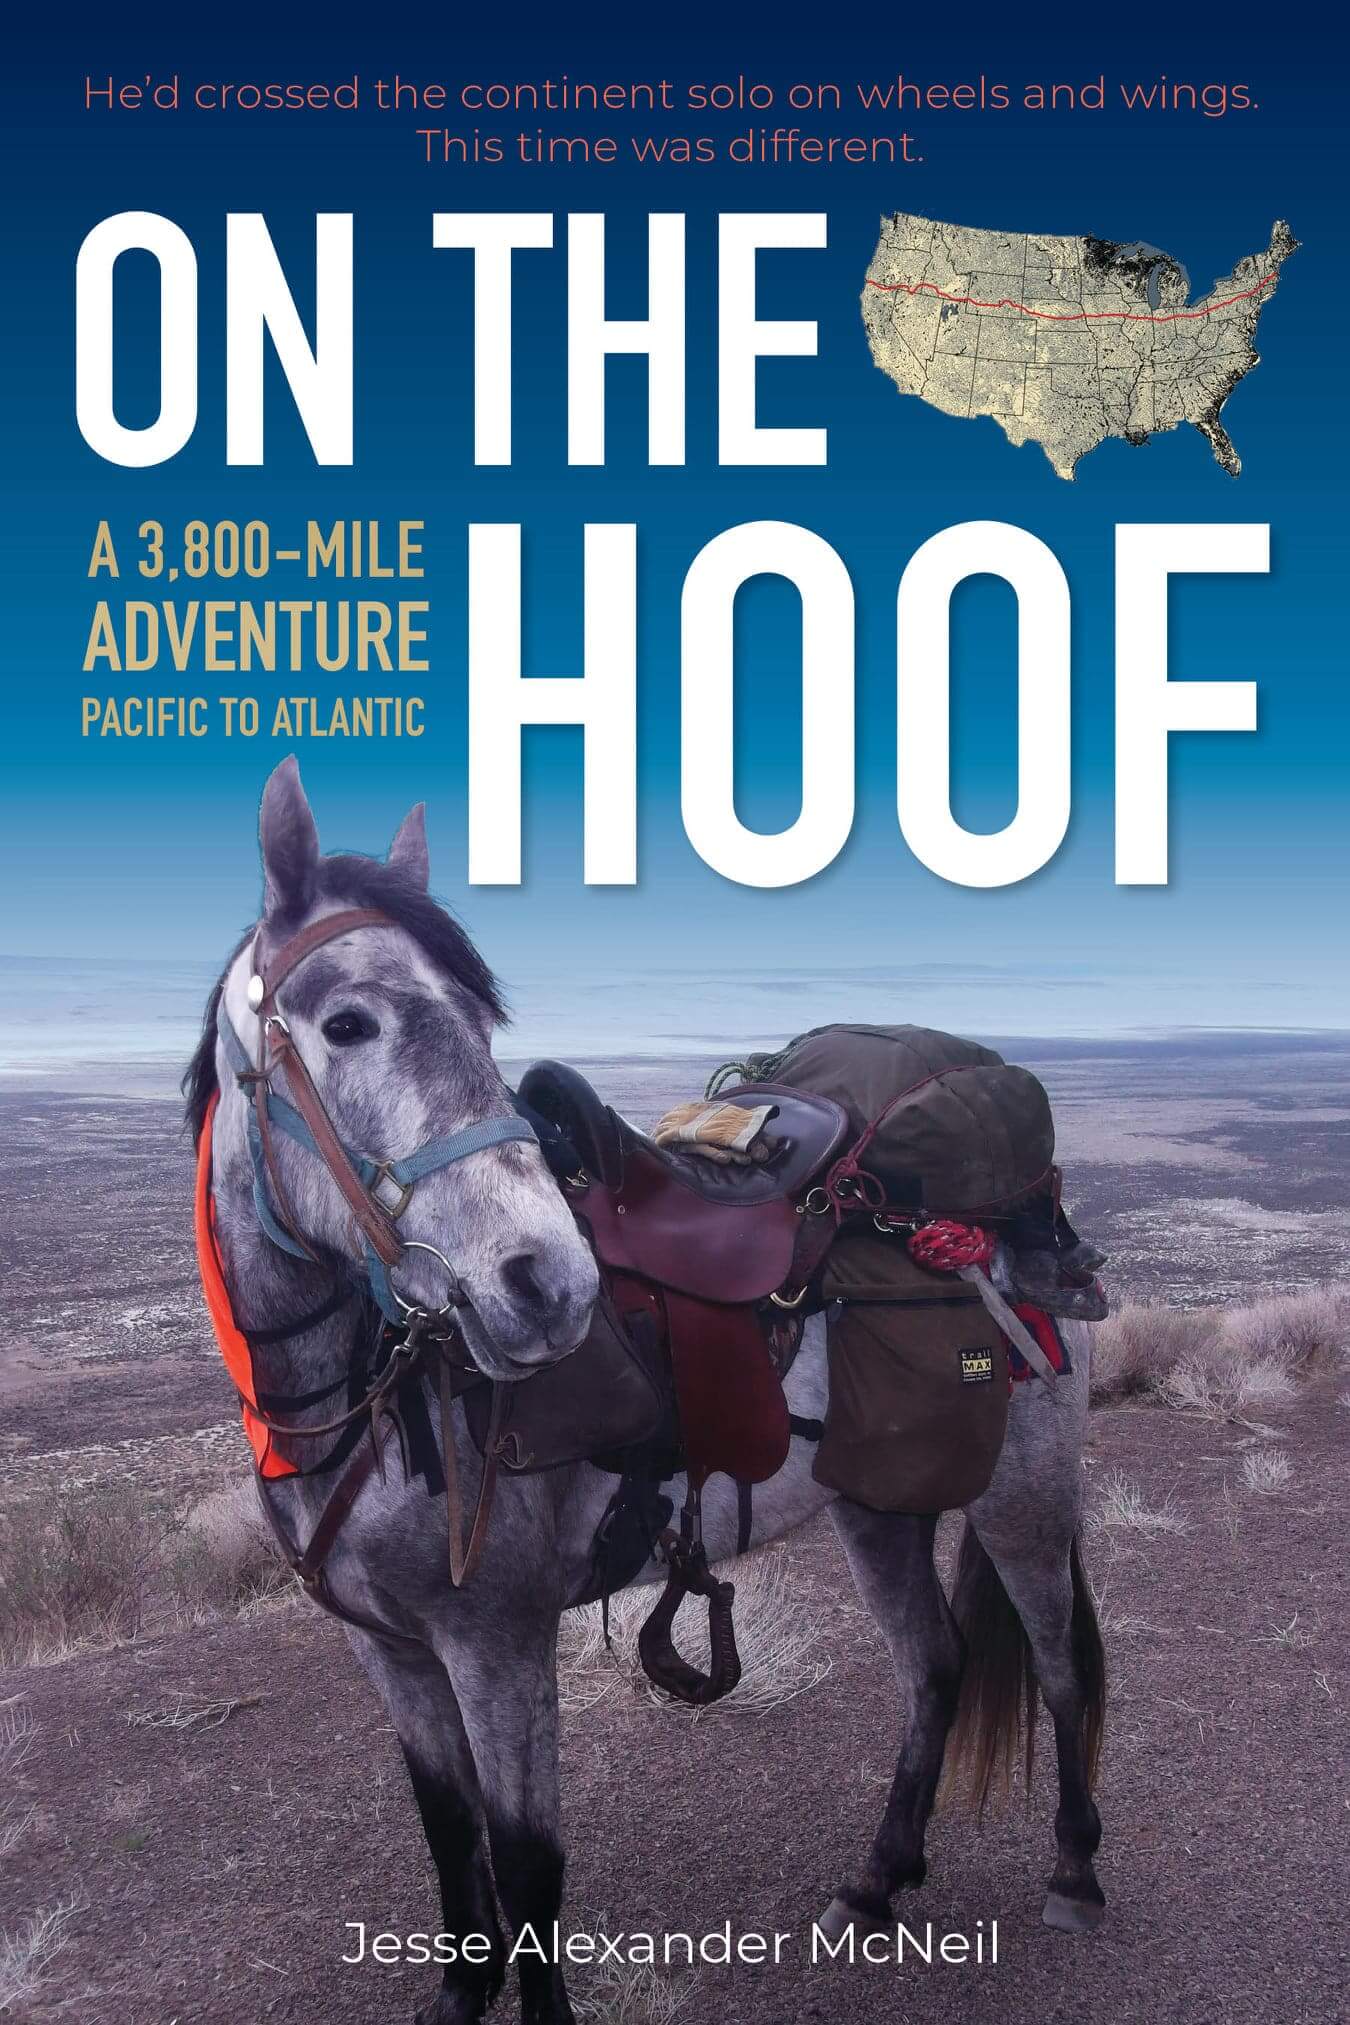 On the Hoof: Traversing the Country and the Mind via the Human-Animal Bond  • Your Impossible Voice